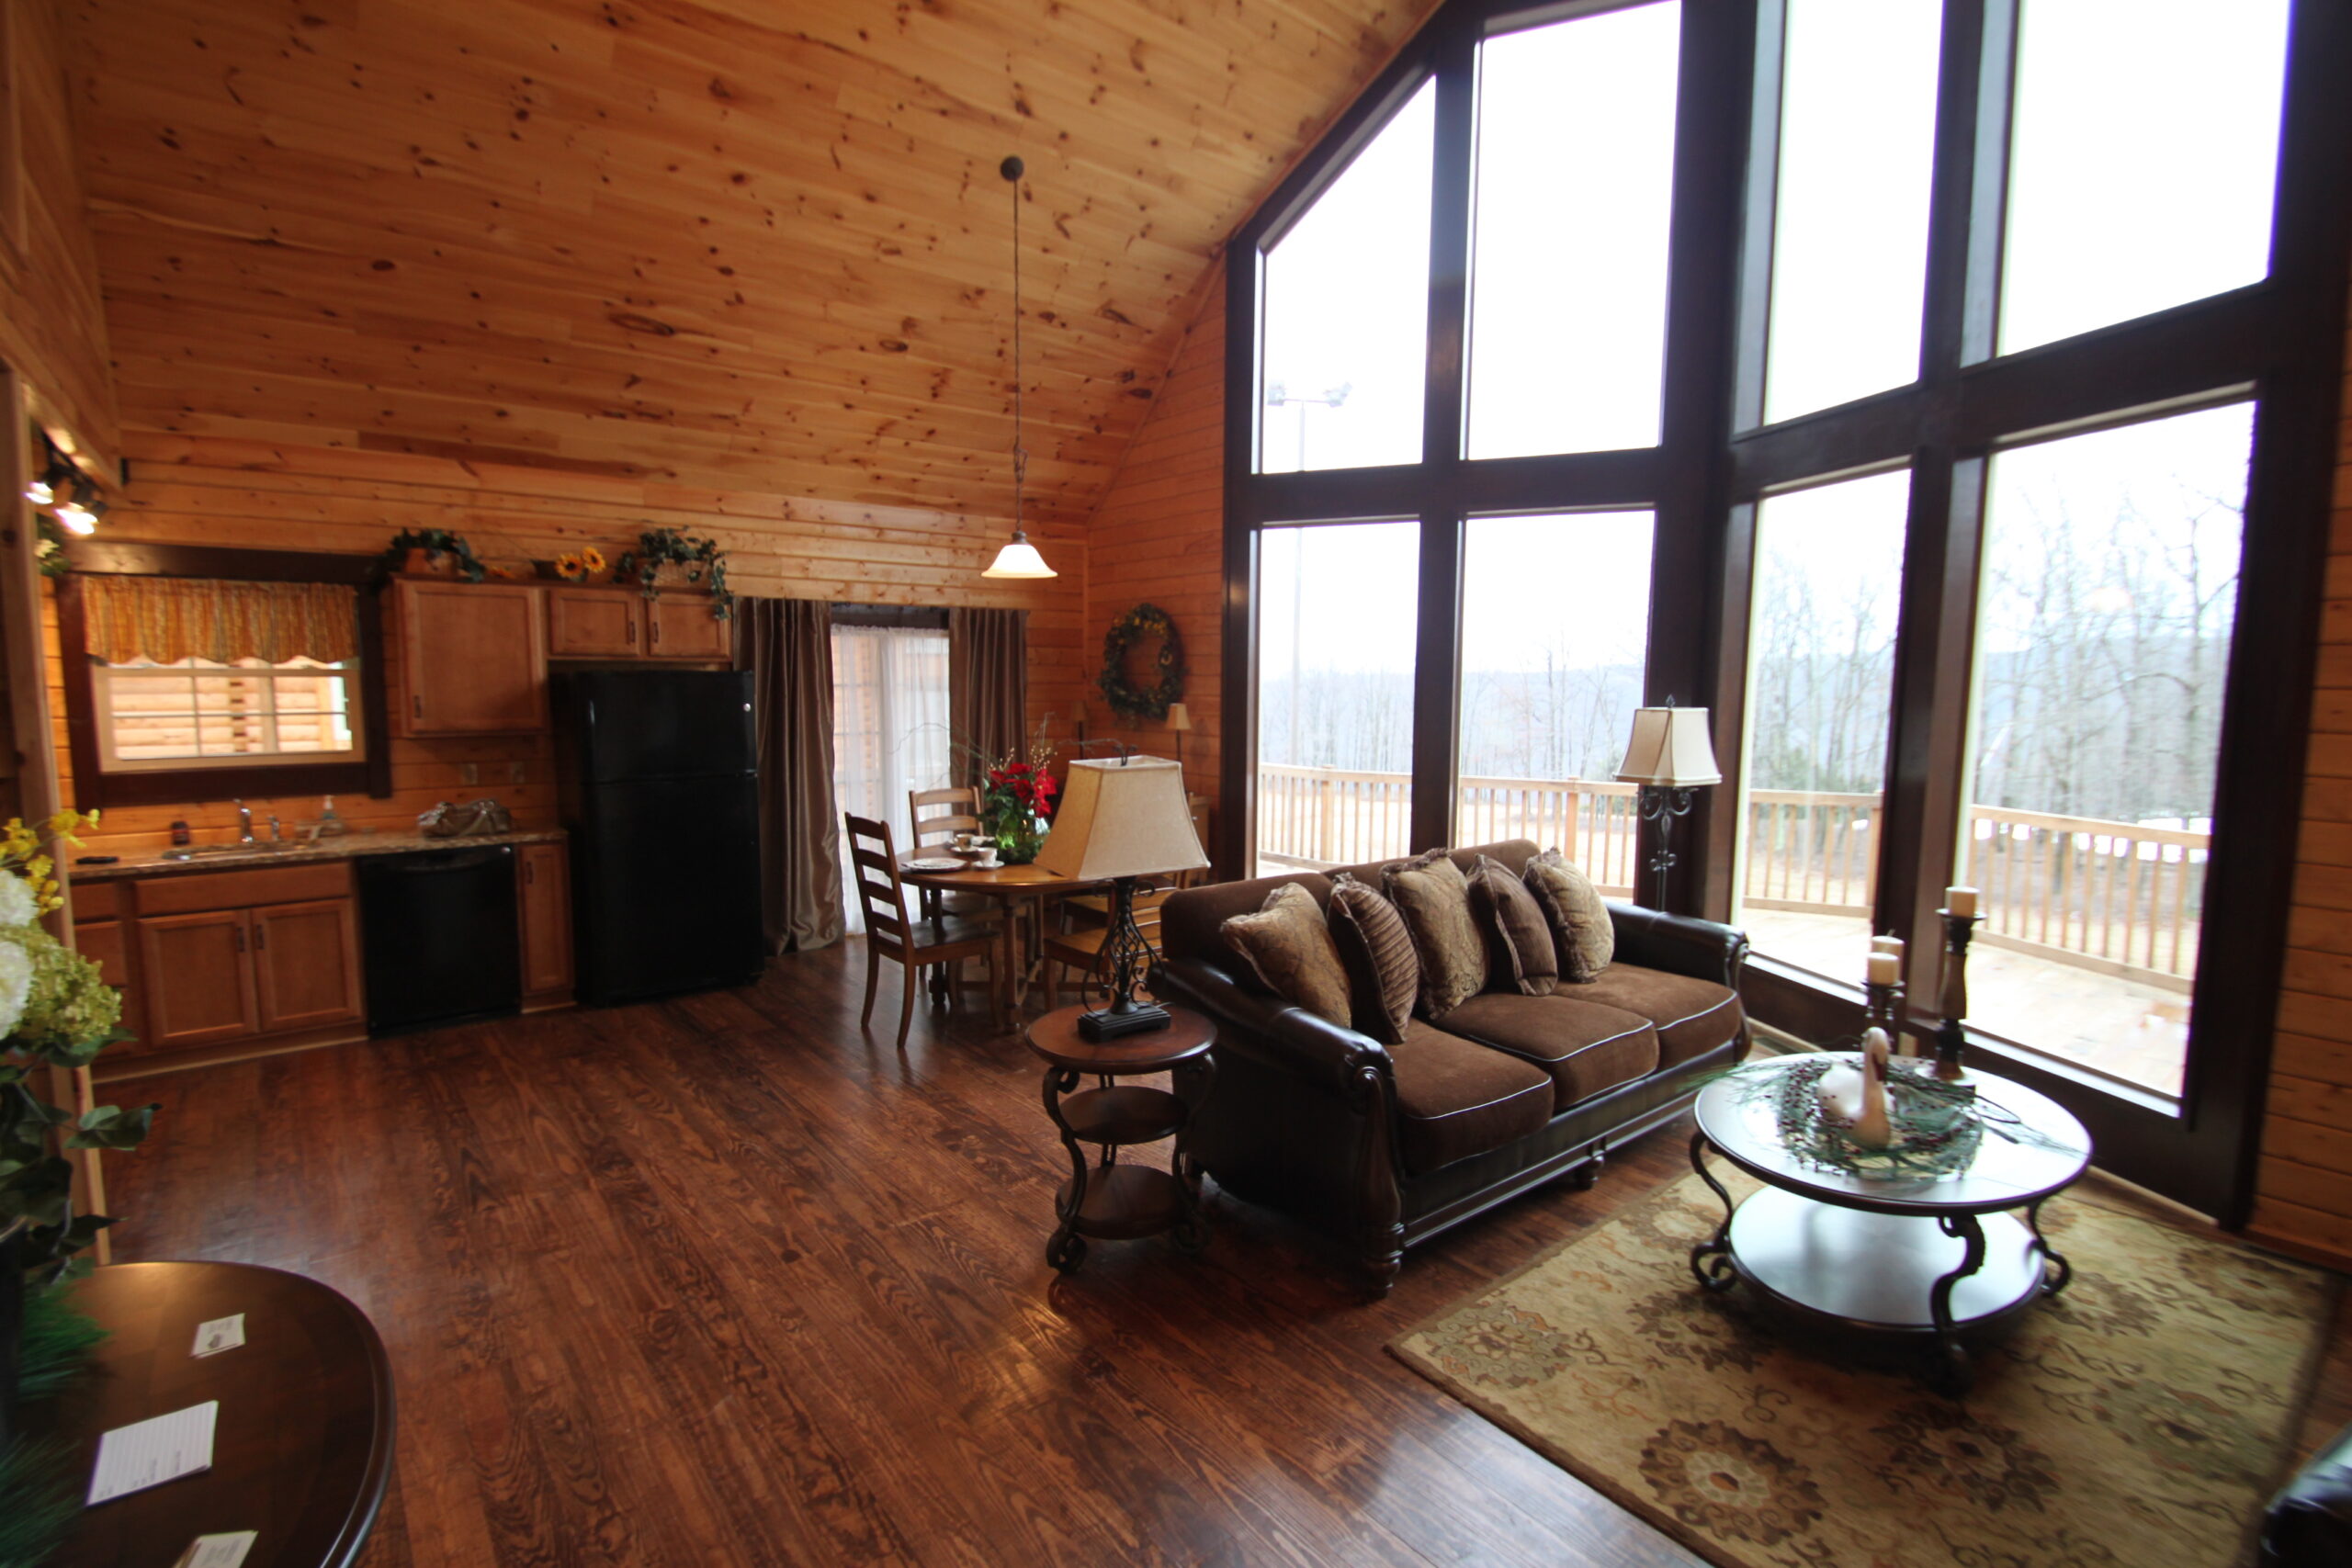 Resort Log Homes at Eagle Rock: Rustic Elegance in the Pocono Mountains